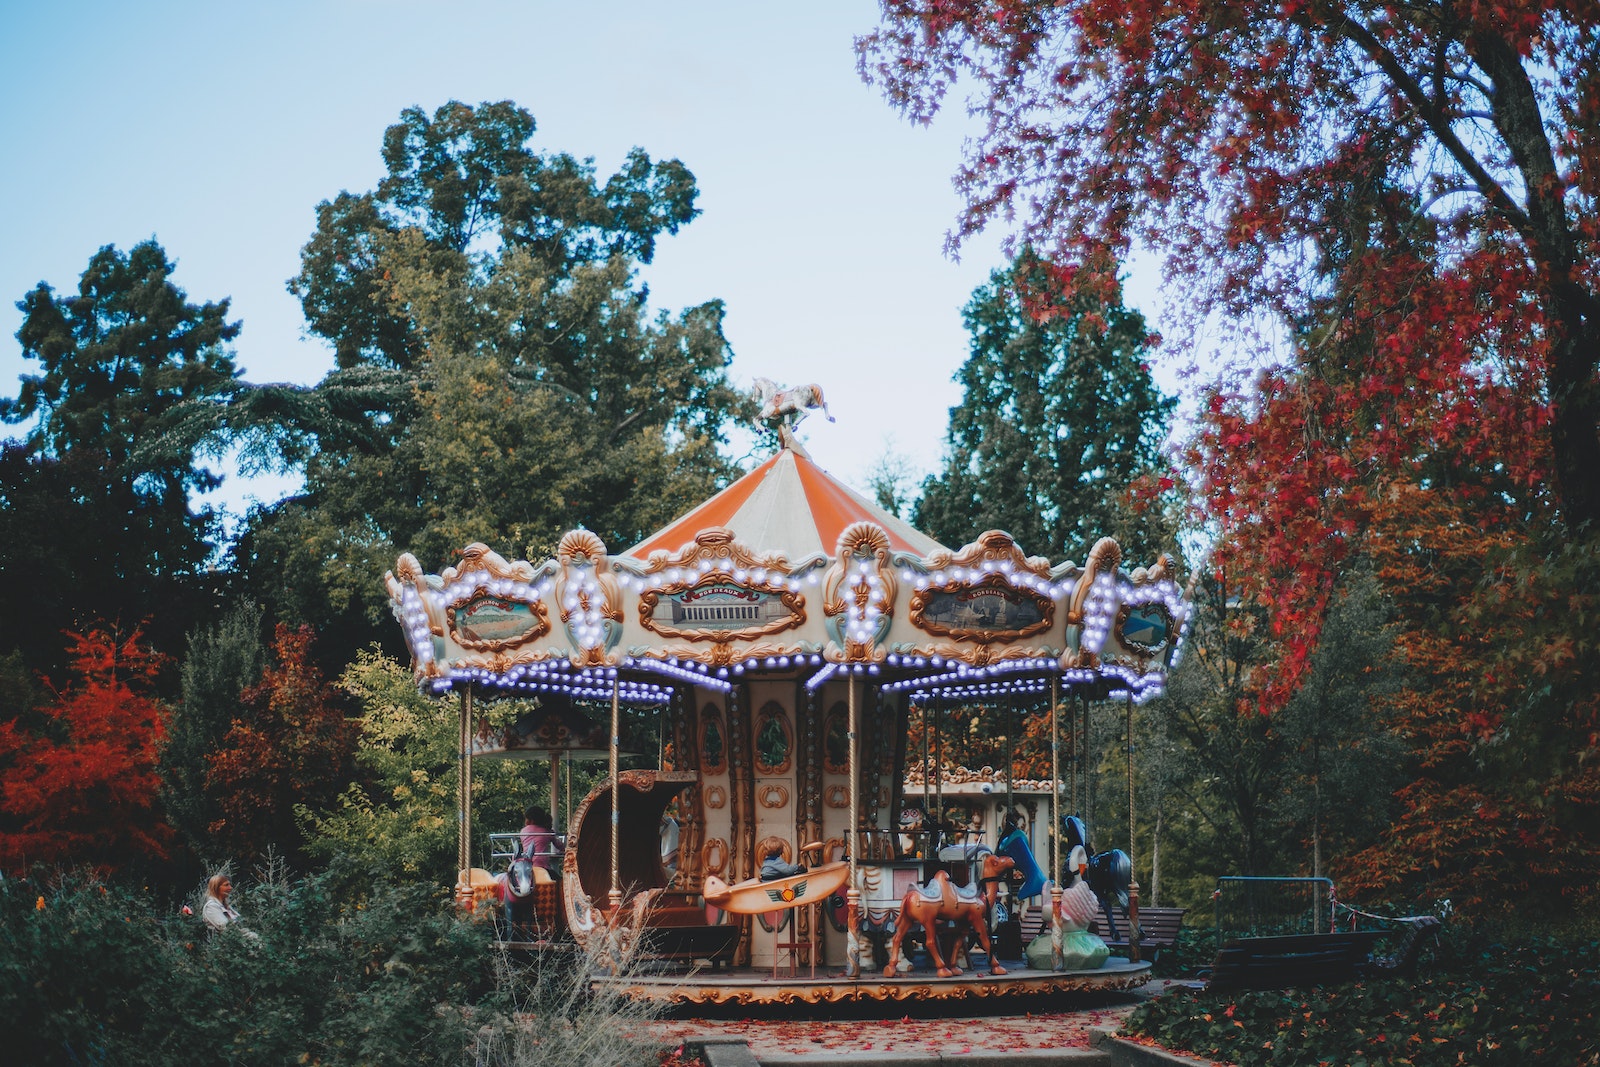 Carousel surrounded with green trees